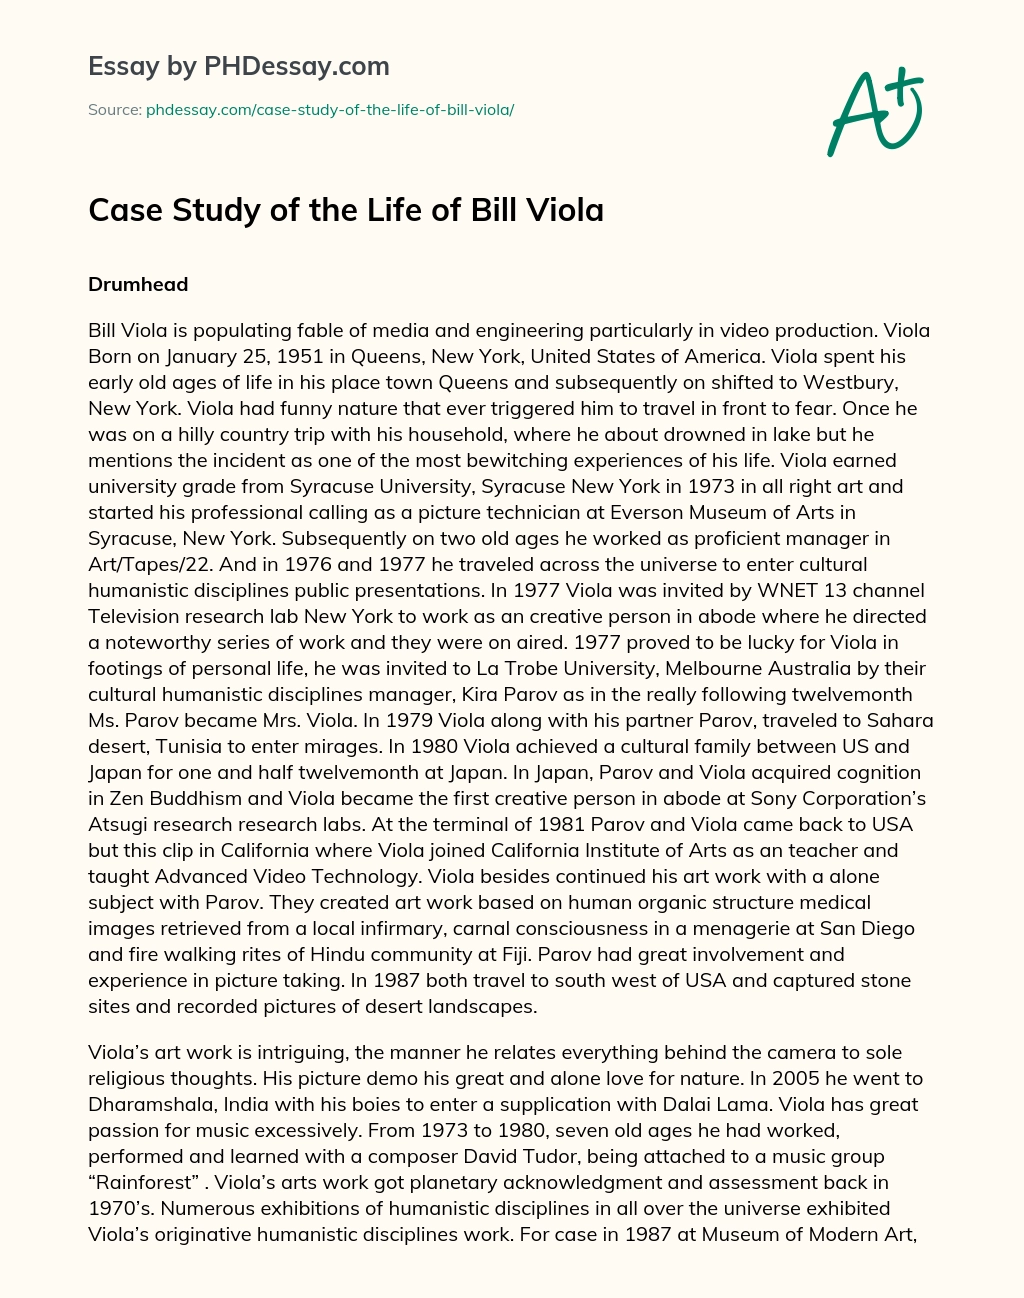 Case Study of the Life of Bill Viola essay